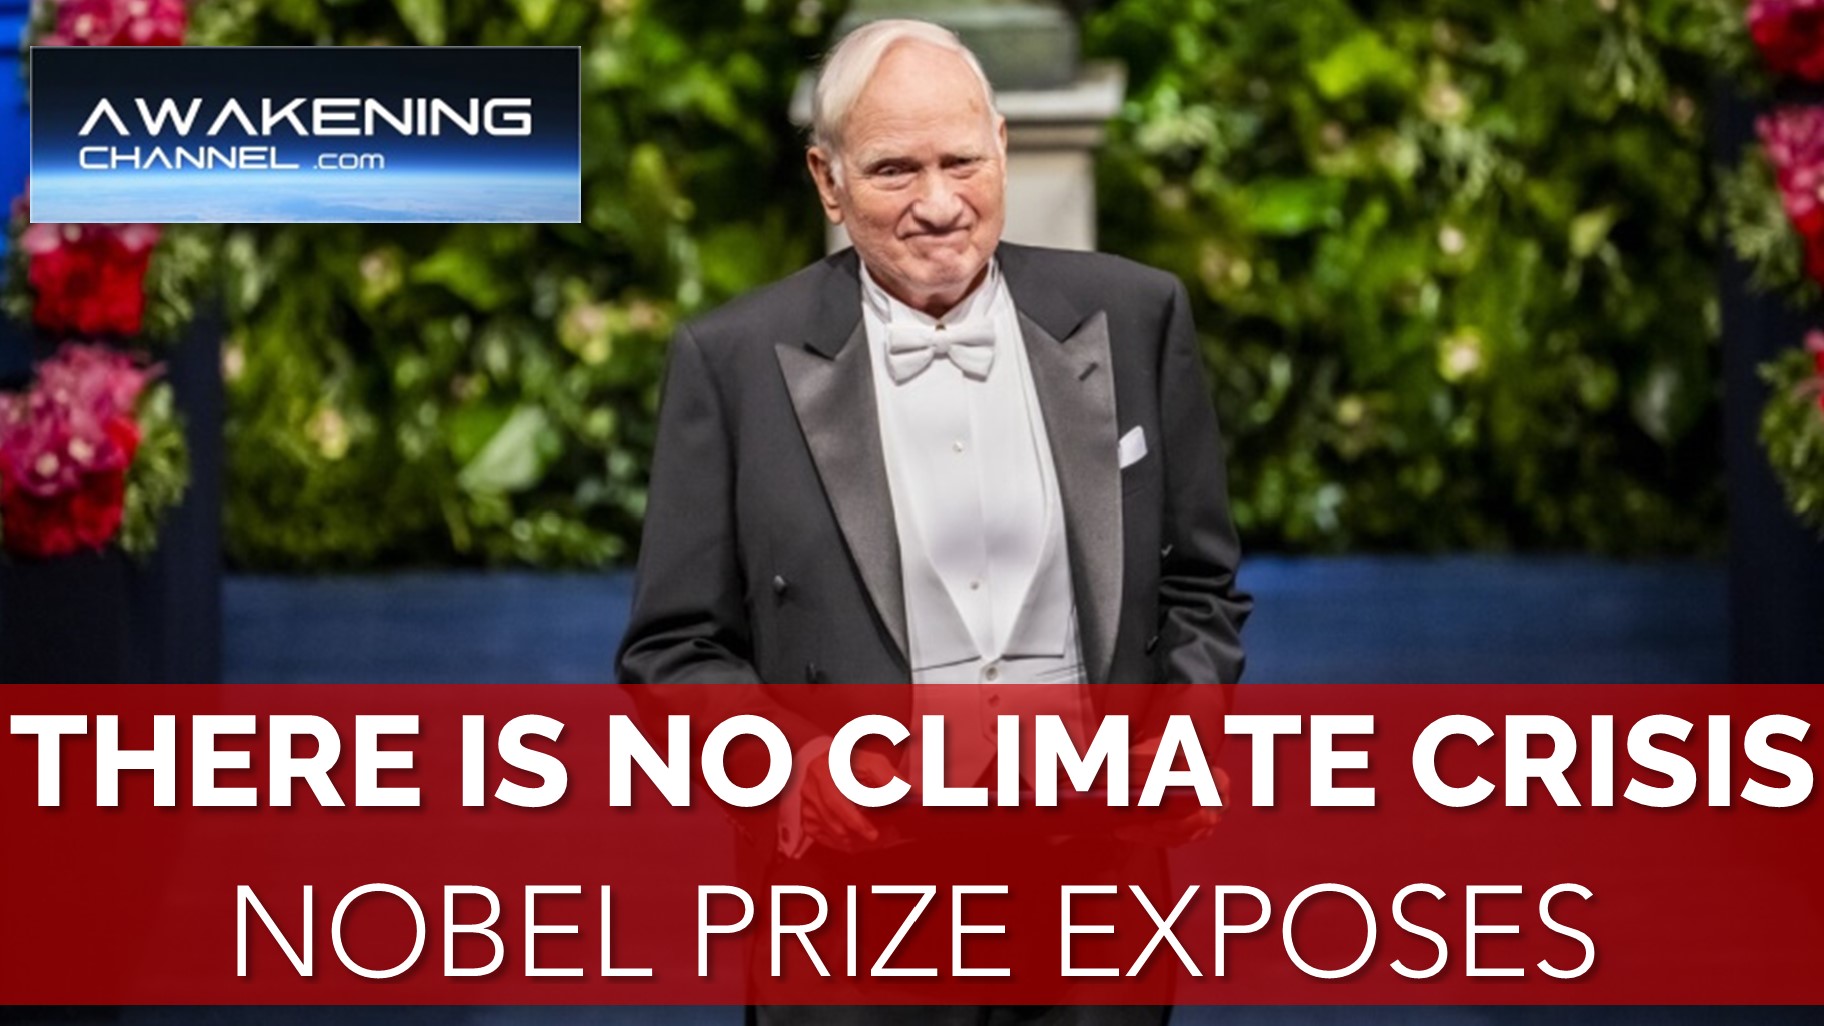 THERE IS NO CLIMATE CRISIS. Nobel Prize-Winning Scientist Exposes